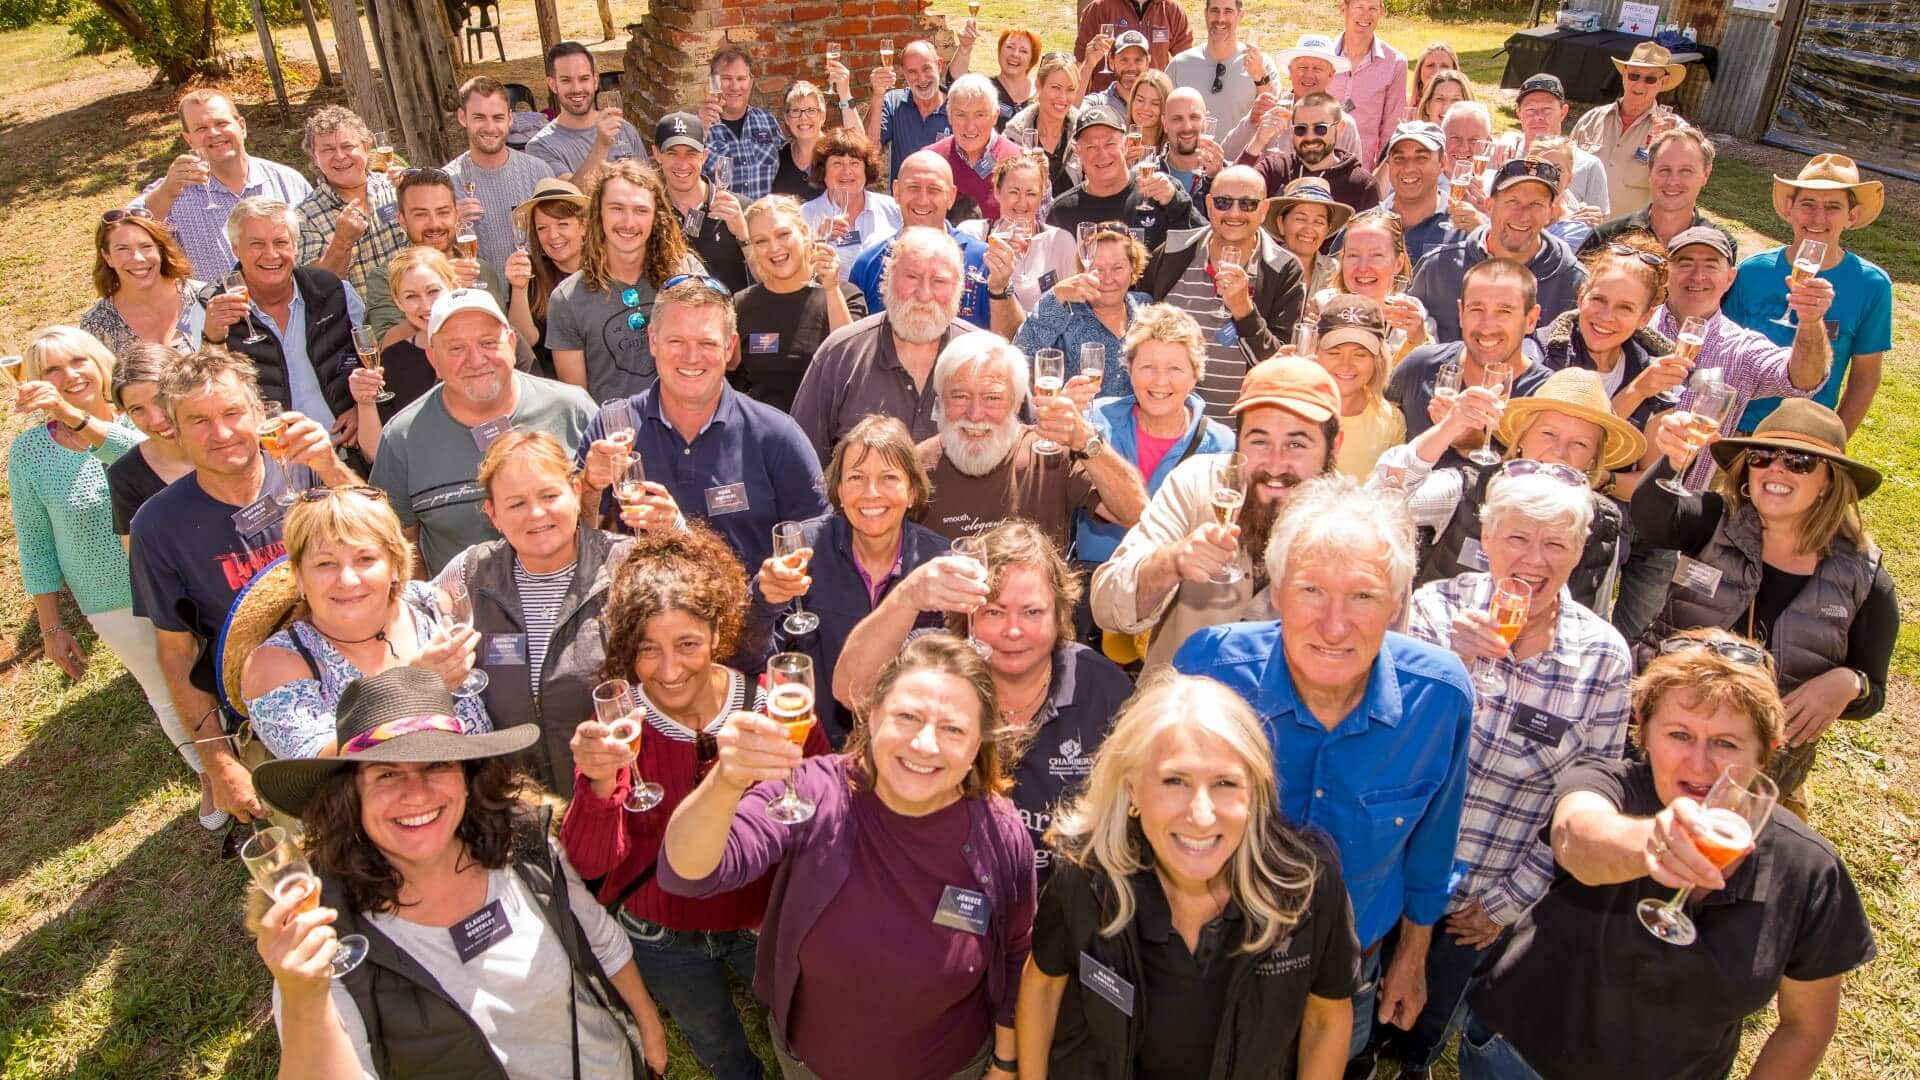 Hugh Hamilton Wines staff and club members standing in a group, smiling at the camera, and cheering their glasses of wine.